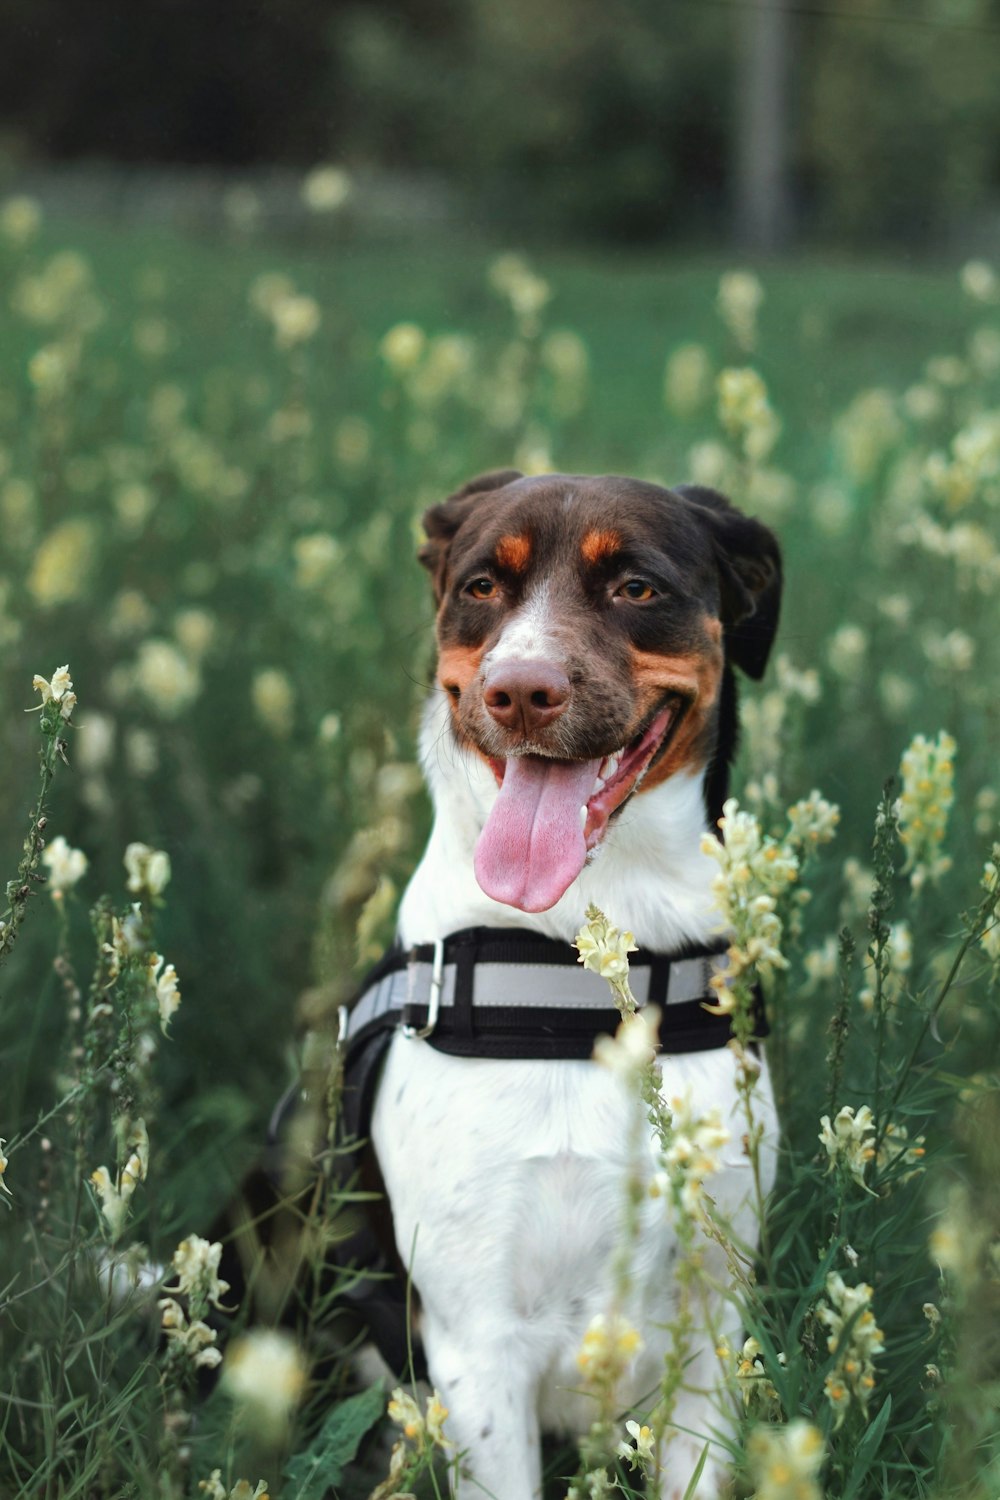 a brown and white dog sitting in a field of flowers